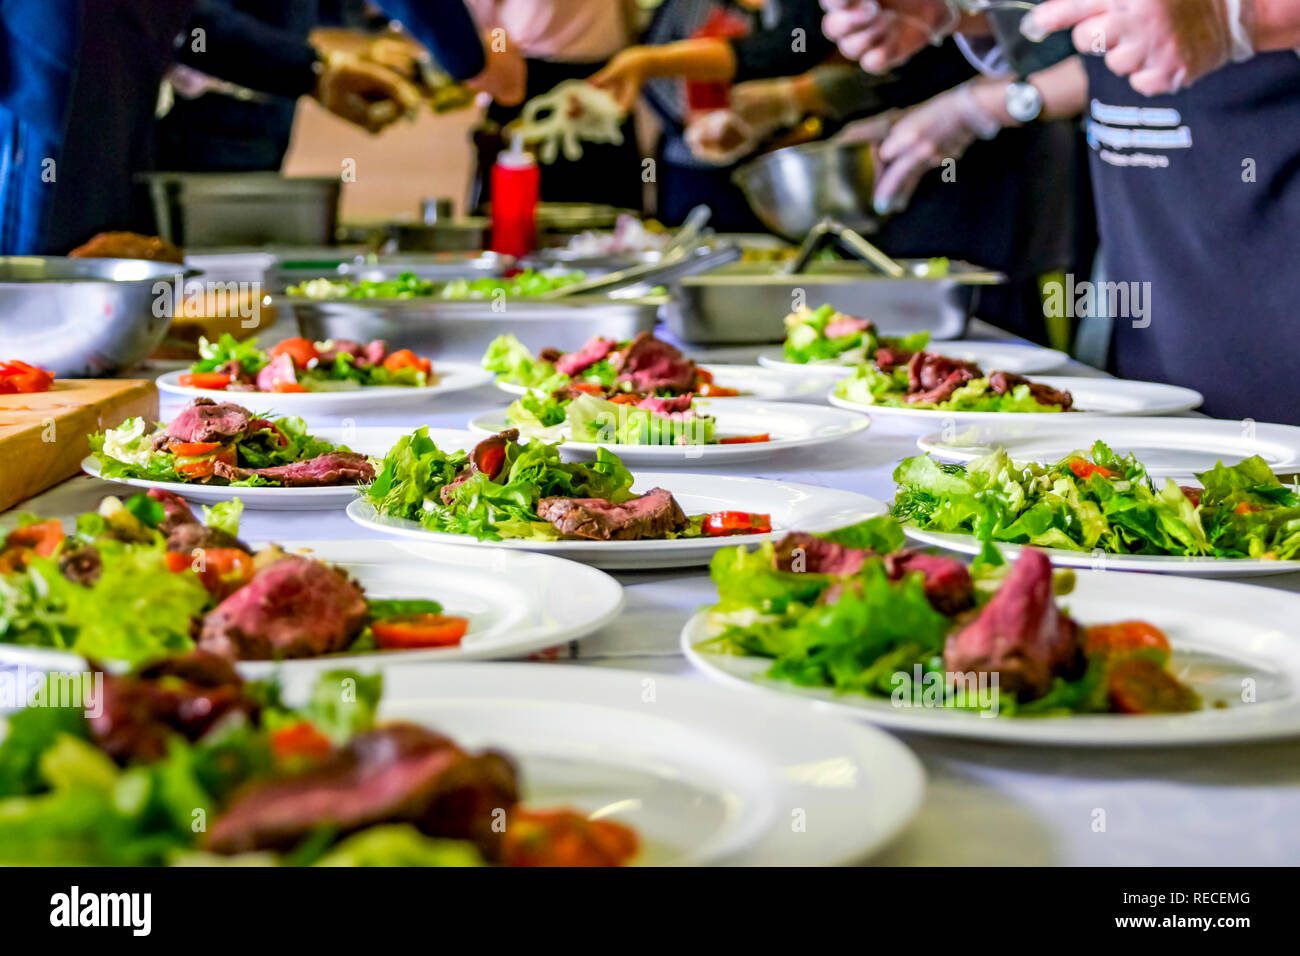 Cooked Roast Beef, Fresh Salad And Tomatoes Served On White Plates. Cooking Master Class, Workshop with People Learning How to Cook Around the Table Stock Photo